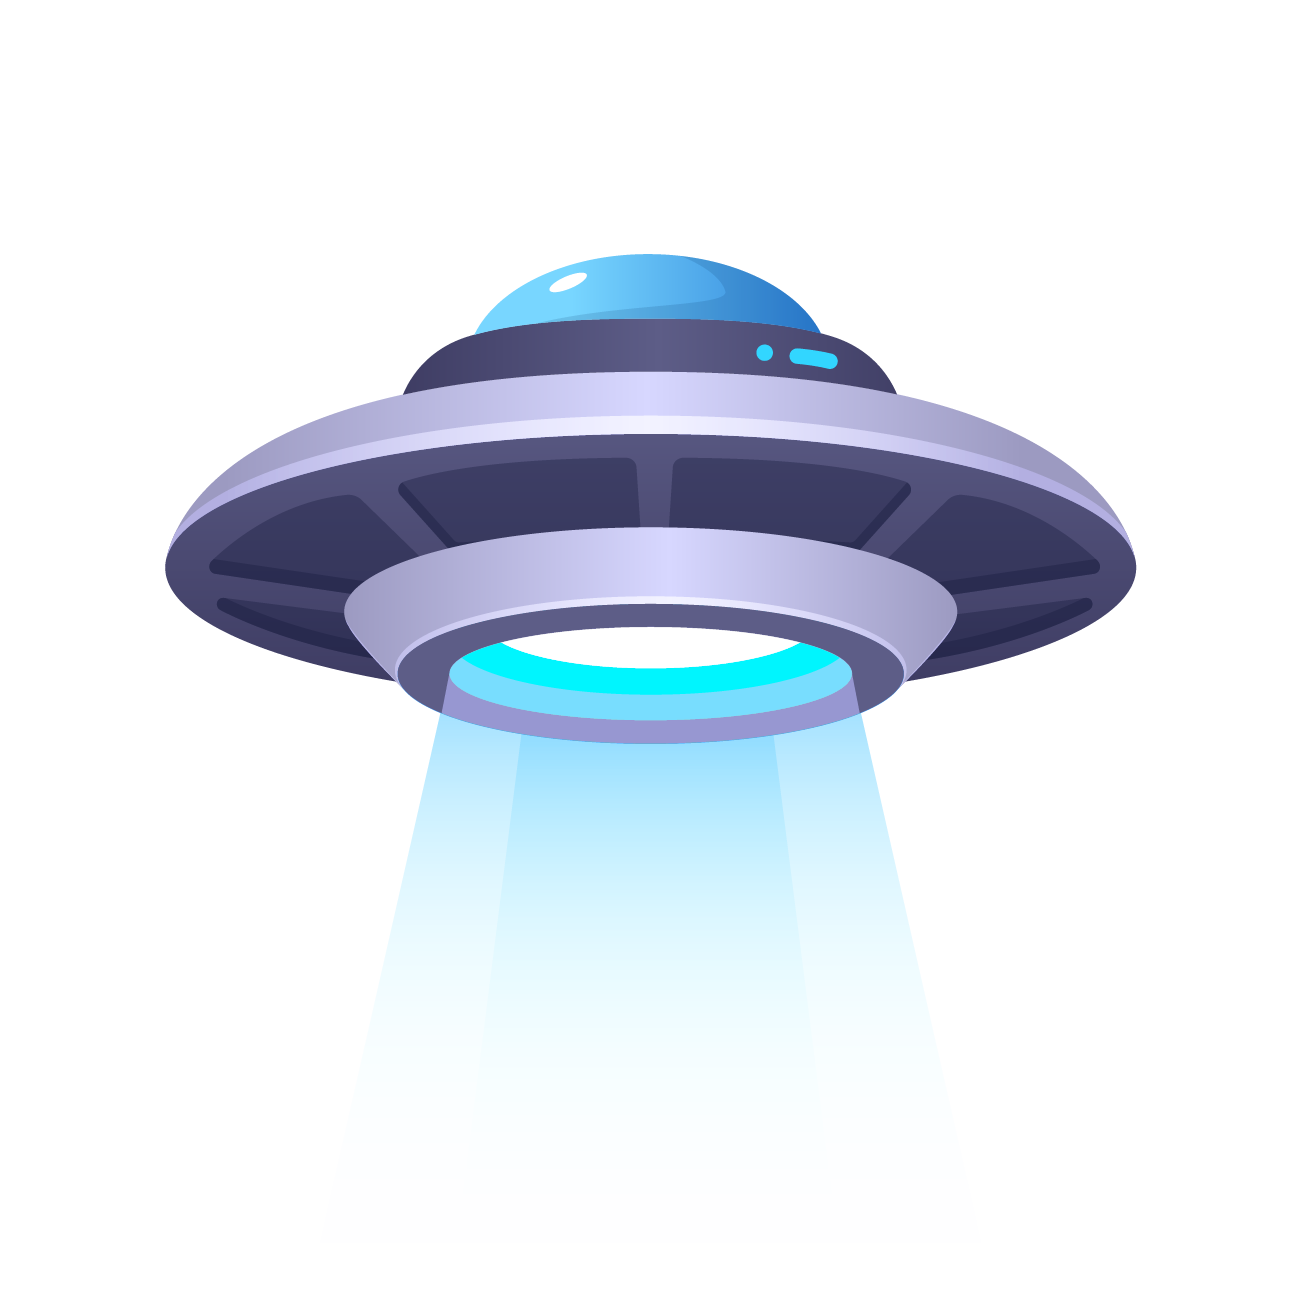 —Pngtree—alien spaceships ufo with blue_6329025